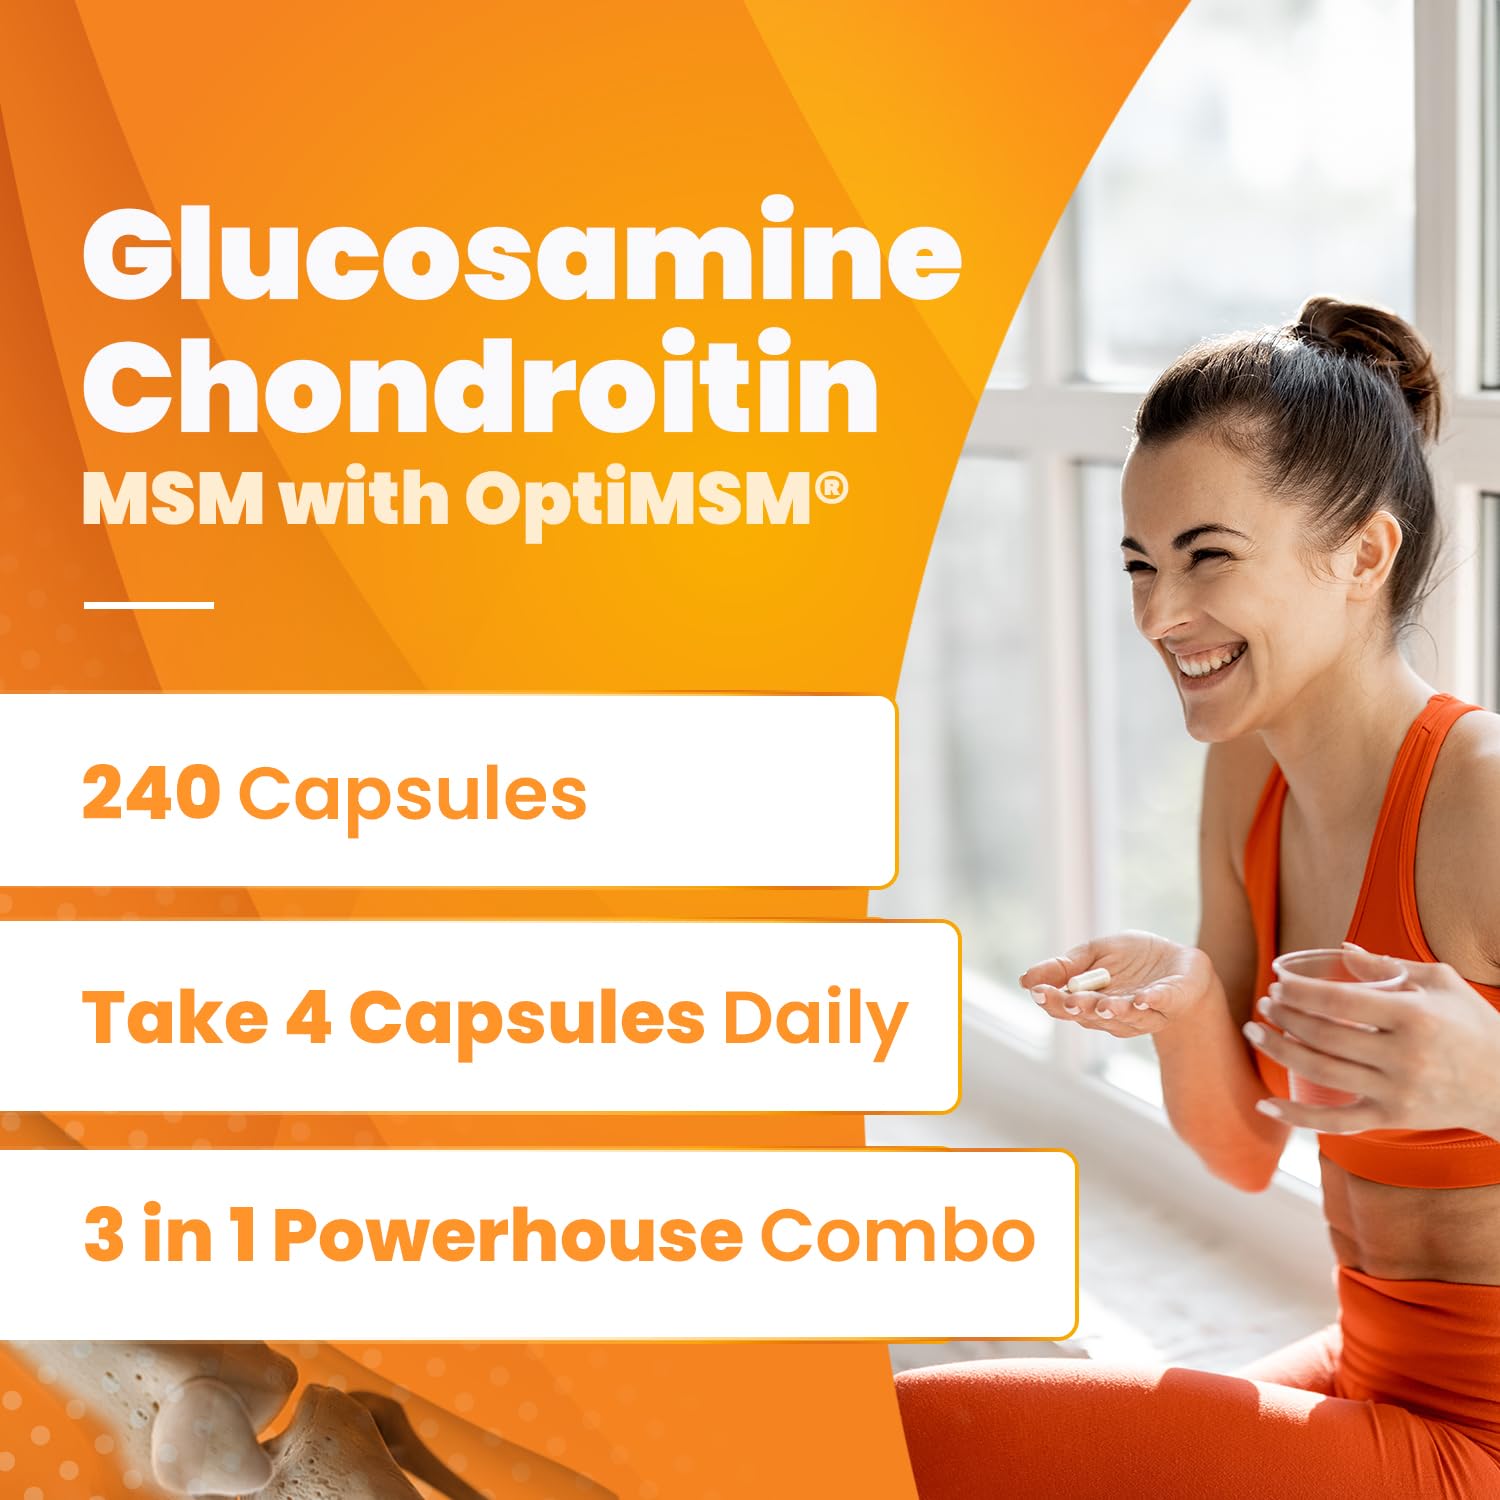 Doctor's Best Glucosamine Chondroitin Msm with OptiMSM Capsules, Supports Healthy Joint Structure, Function & Comfort, Non-GMO, Gluten Free, Soy Free, 240 Count (Pack of 1)